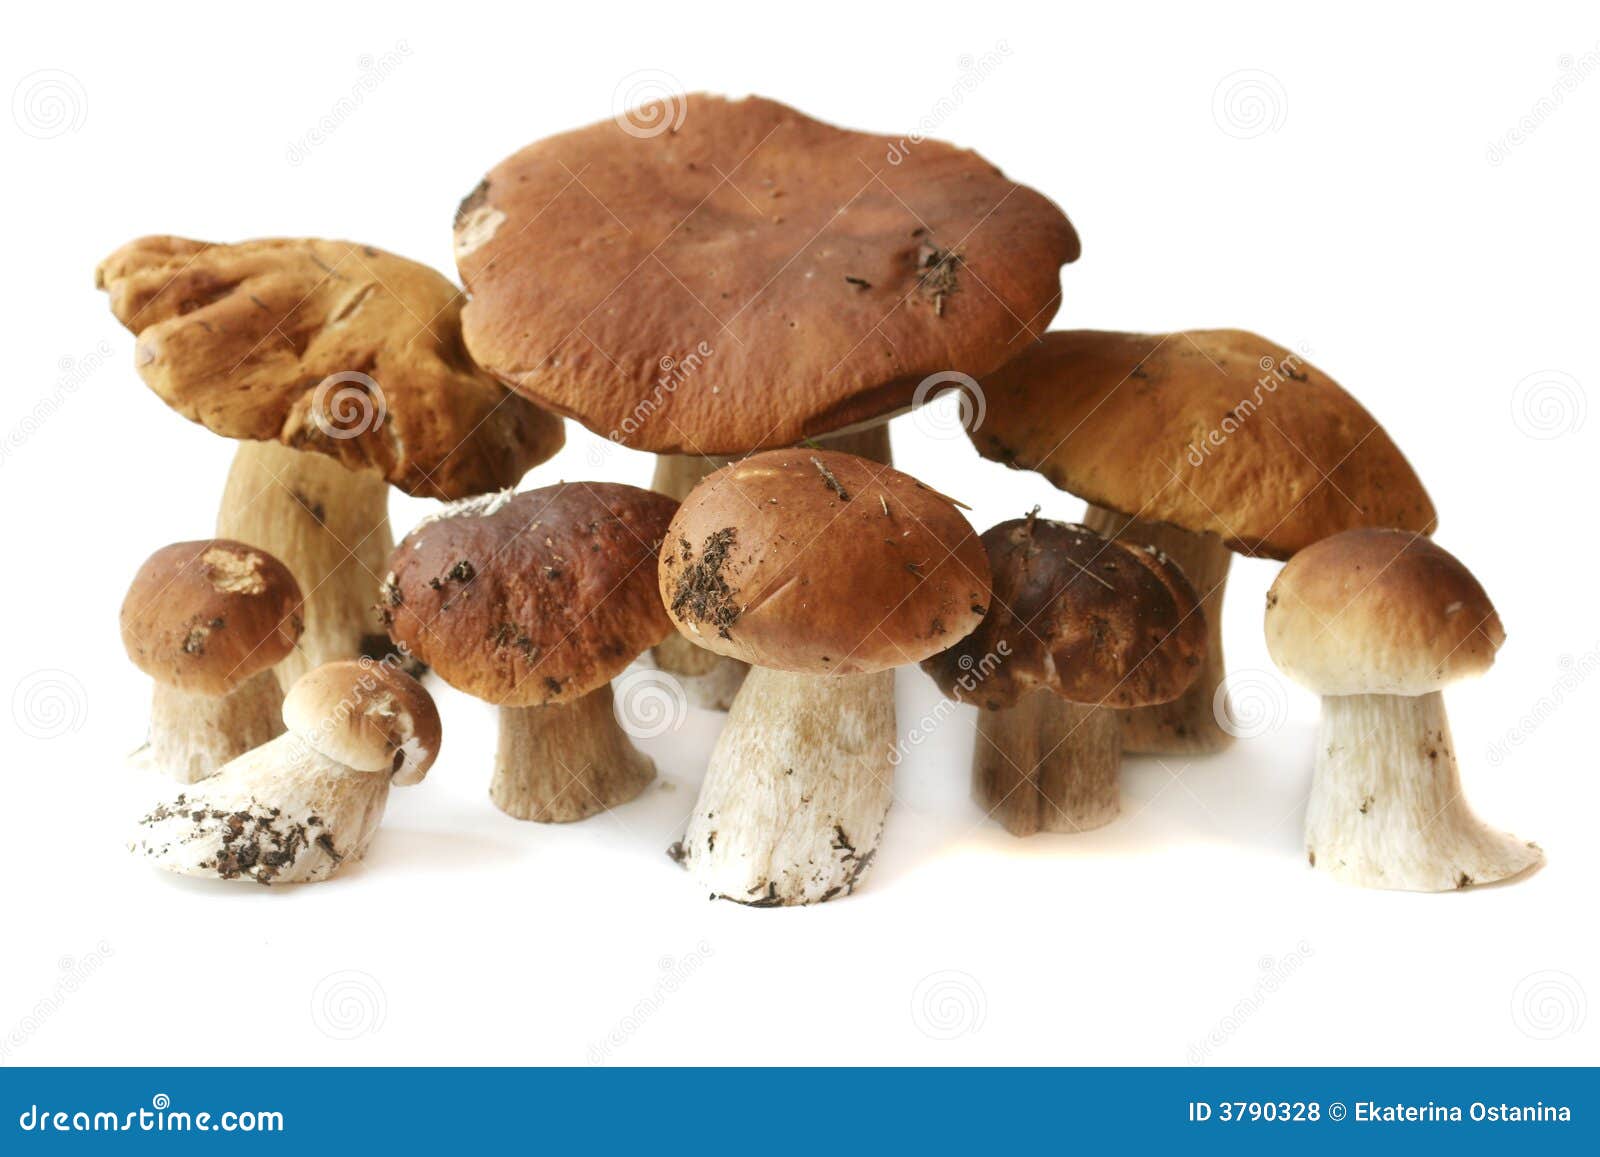 many ceps are 